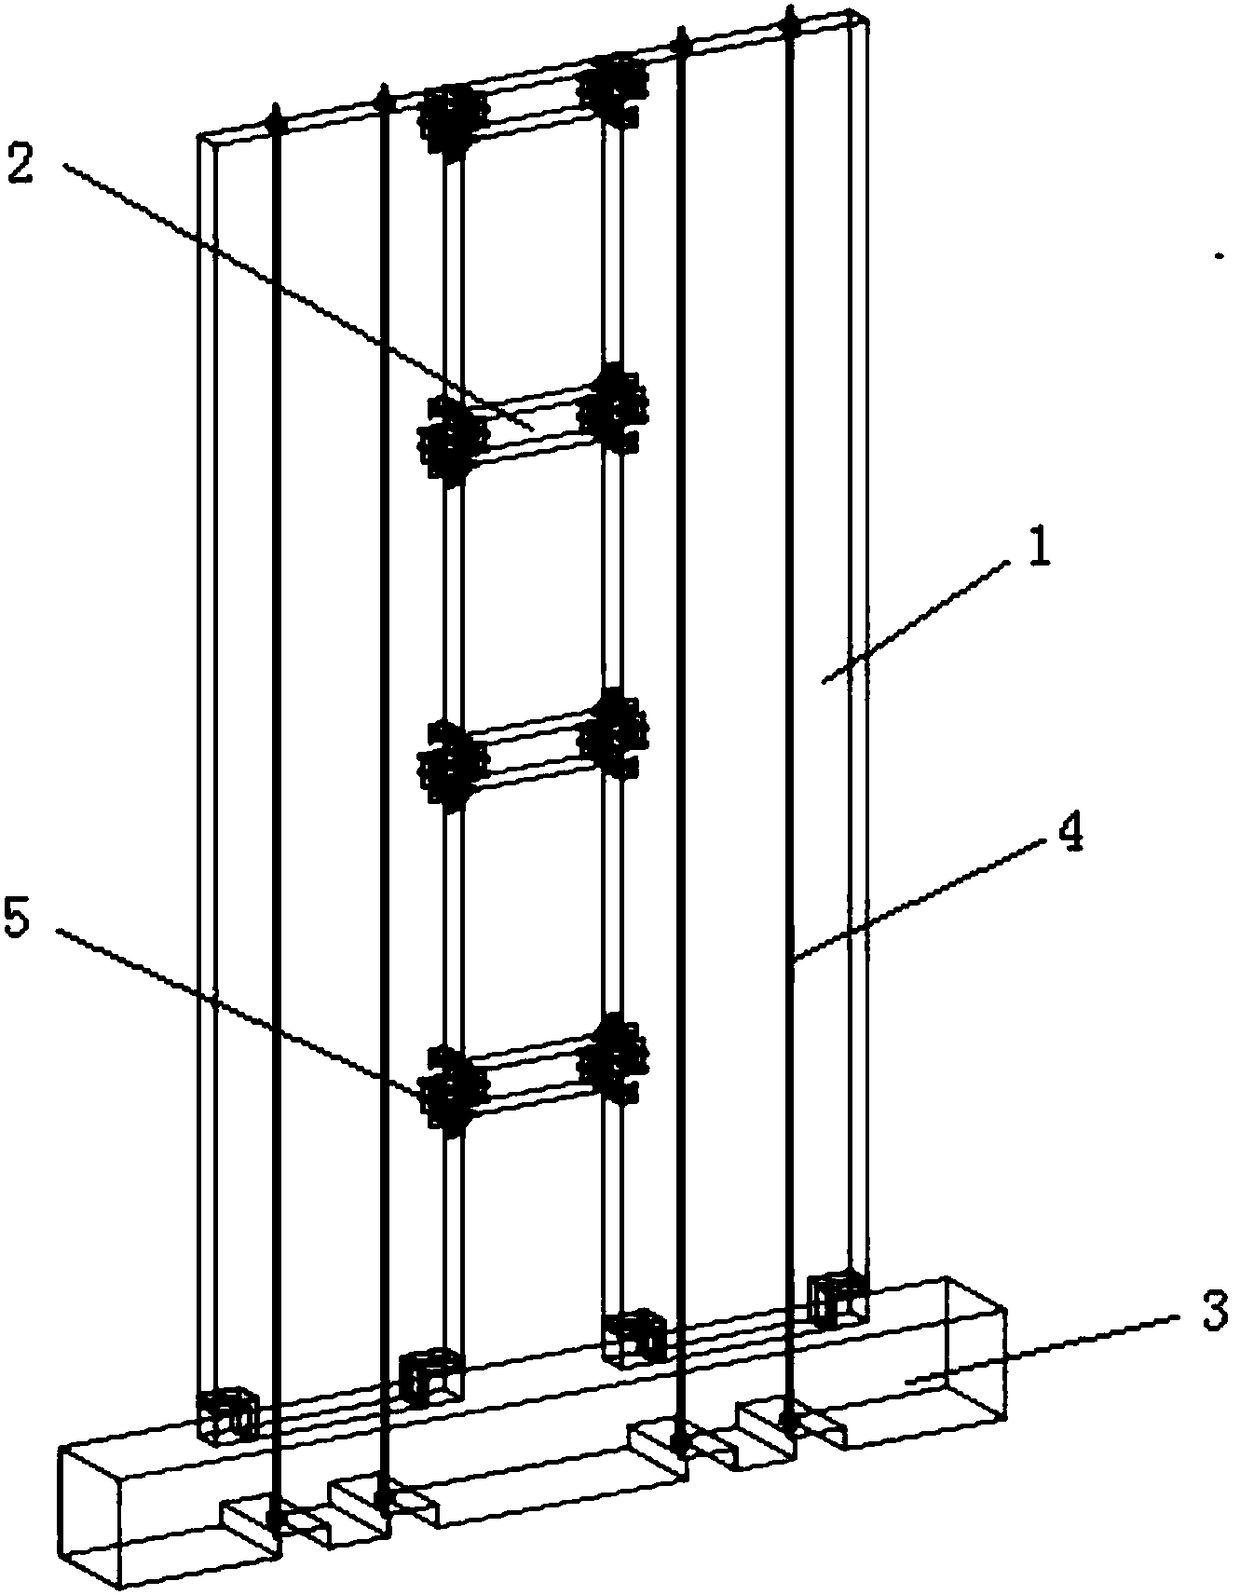 Prestress orthogonal laminated wood coupled shear wall capable of achieving swinging and self-resetting